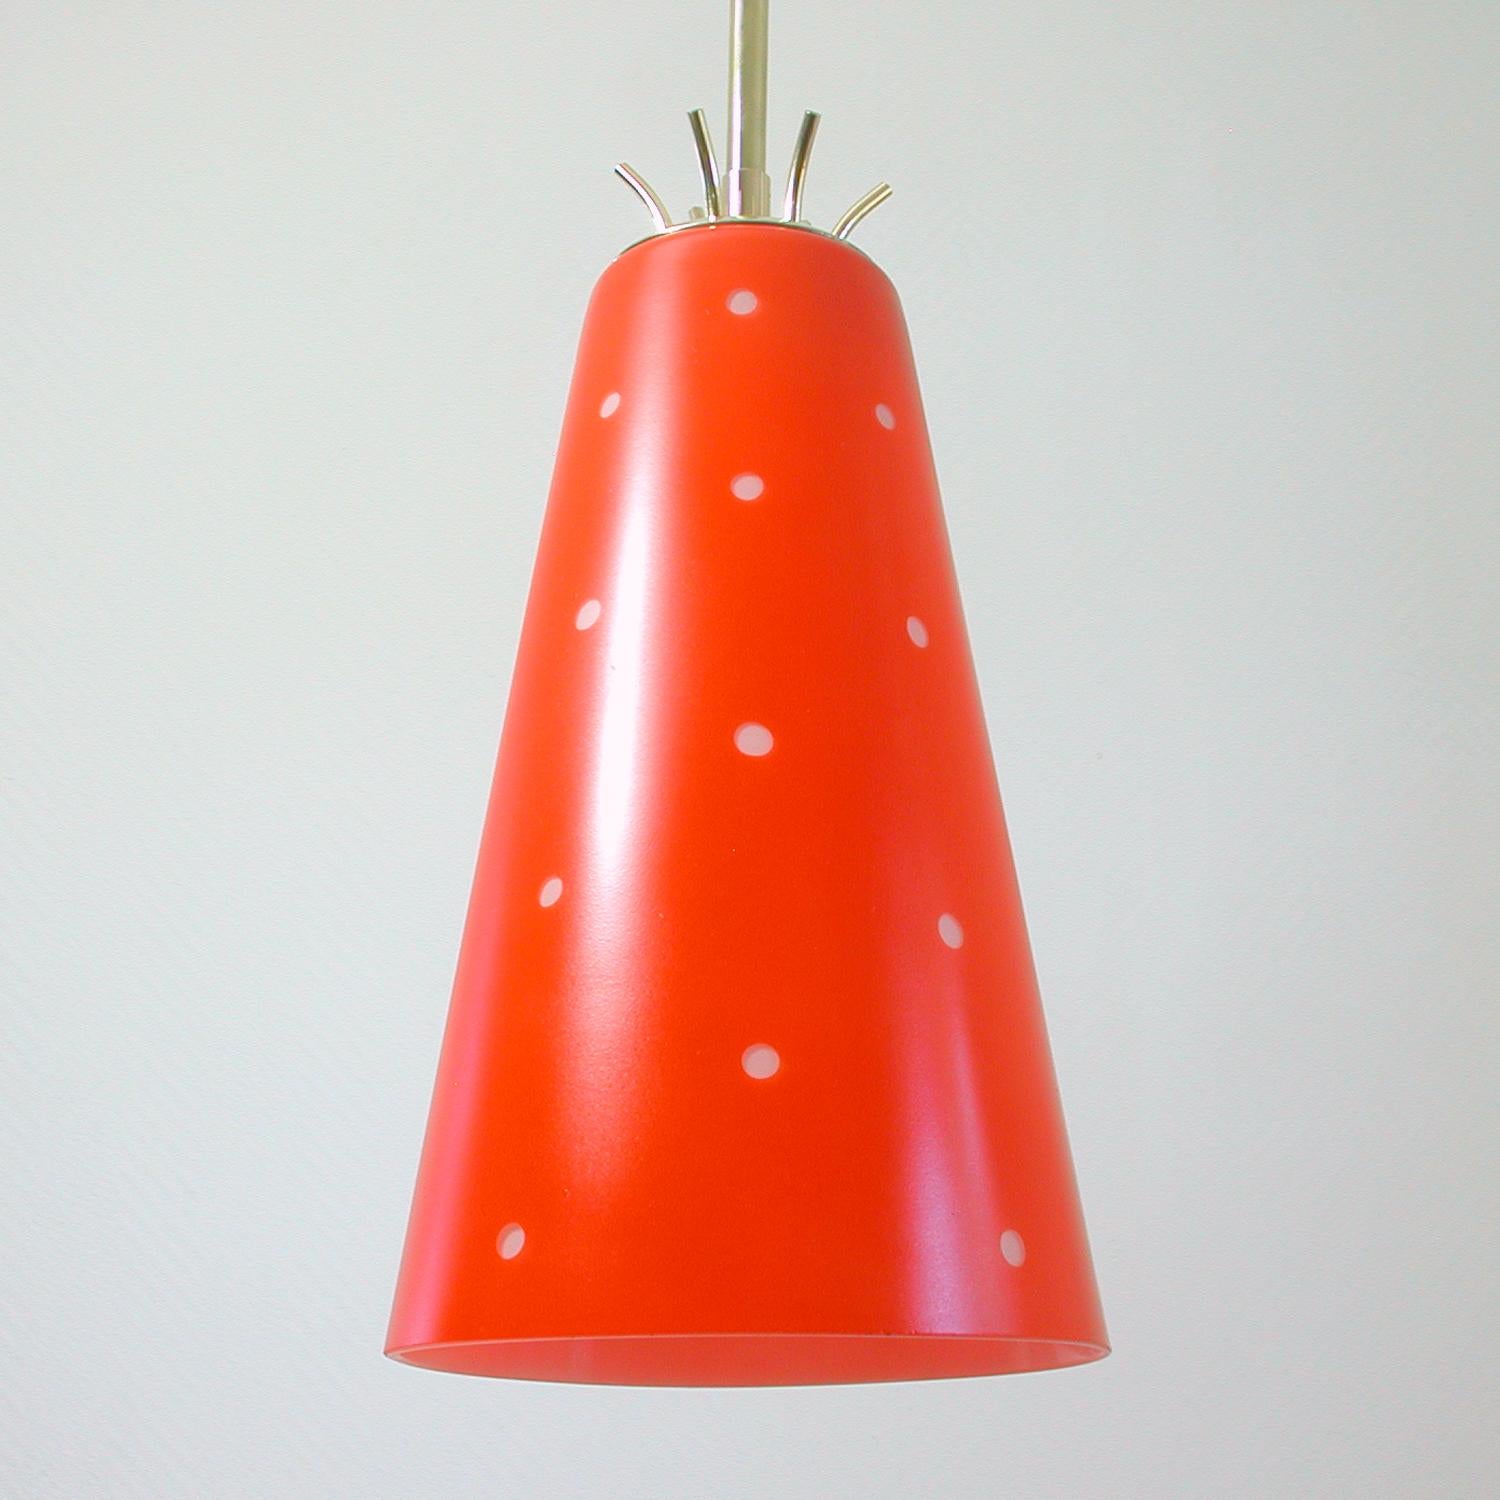 Mid-20th Century Scandinavian Midcentury Red Glass and Brass Pendant, 1950s For Sale